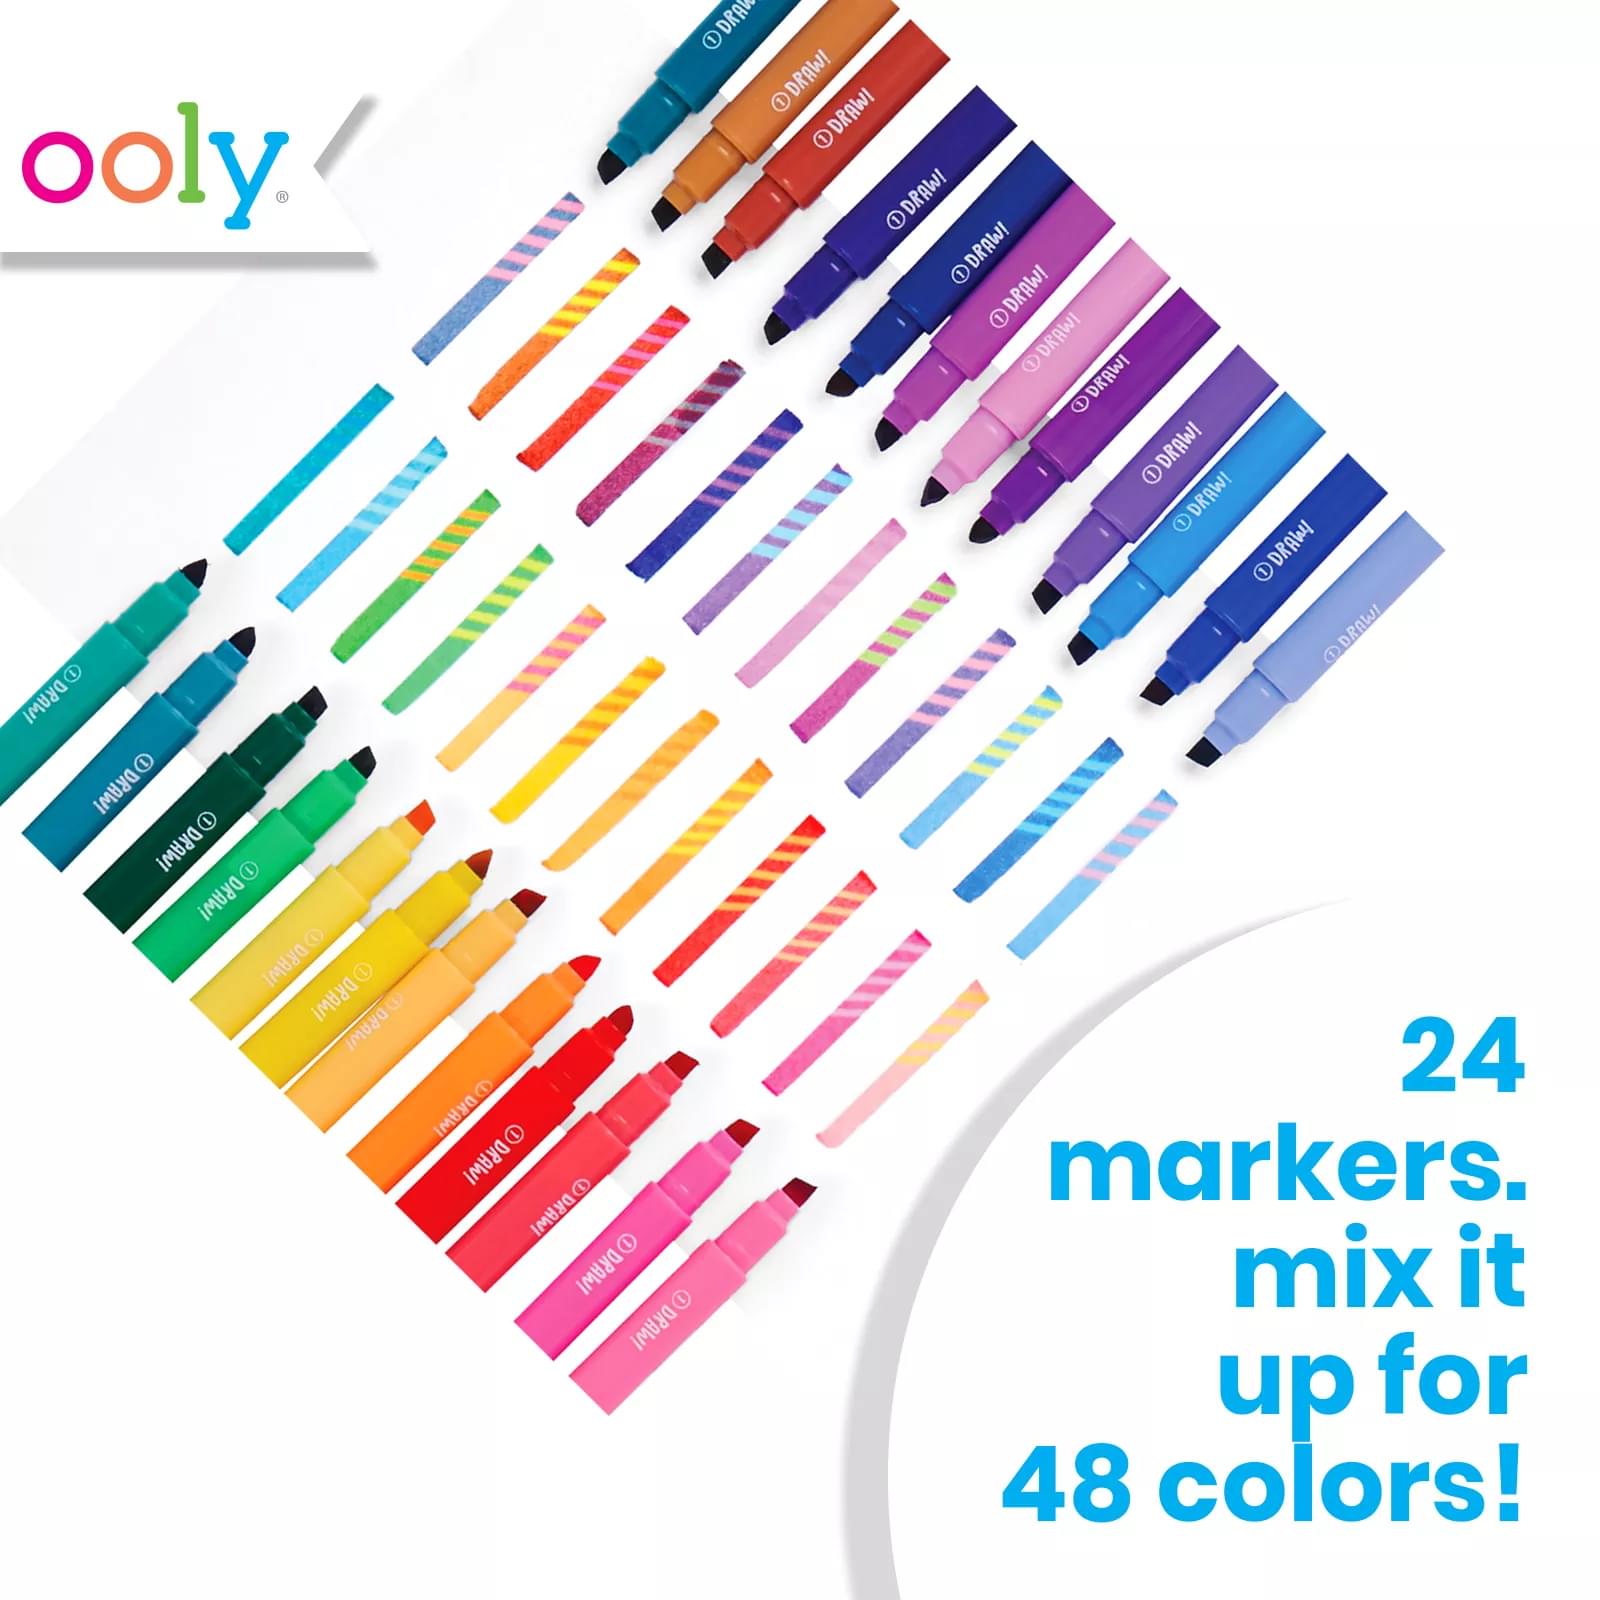 Switch up your art with Switch-eroo Color Changing Markers! Draw with the  color chisel tip side then SWITCH to the mystery color changing side and  watch, By OOLY